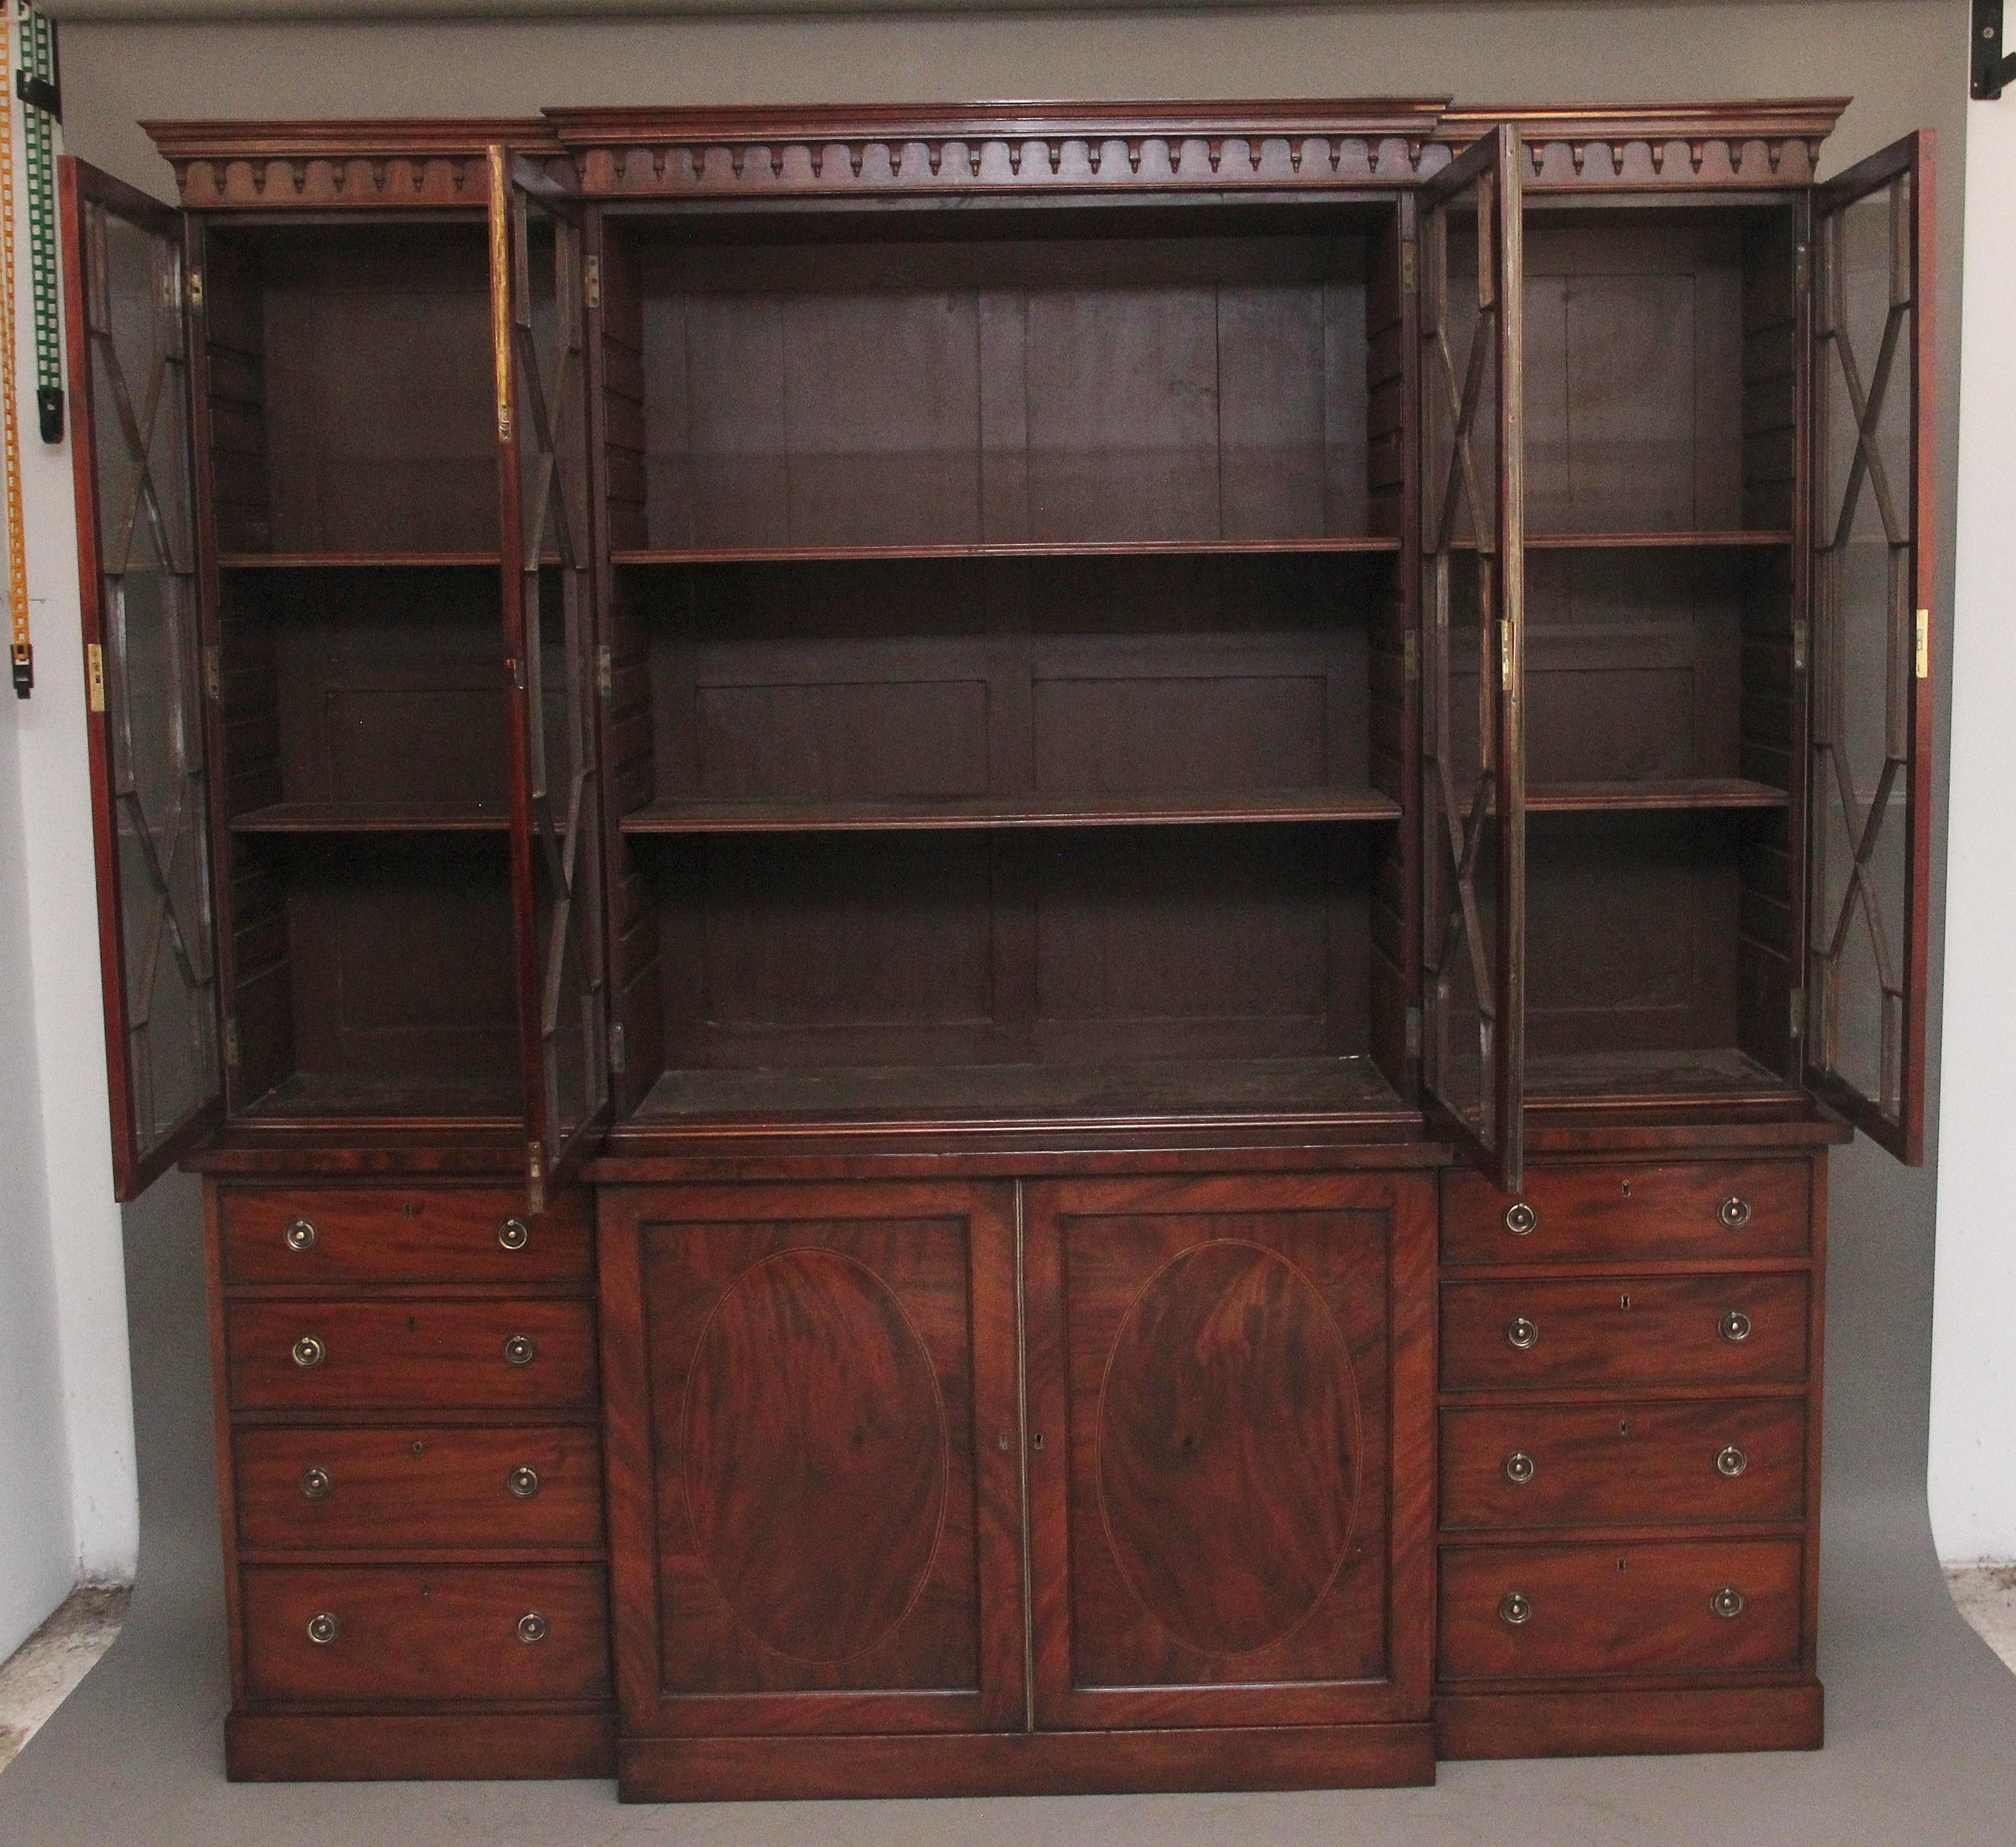 A superb quality early 19th Century mahogany breakfront bookcase, the stepped moulded cornice with carved decoration below above four large astrigal glazed doors opening to reveal two adjustable shelves inside each section, the bottom section having